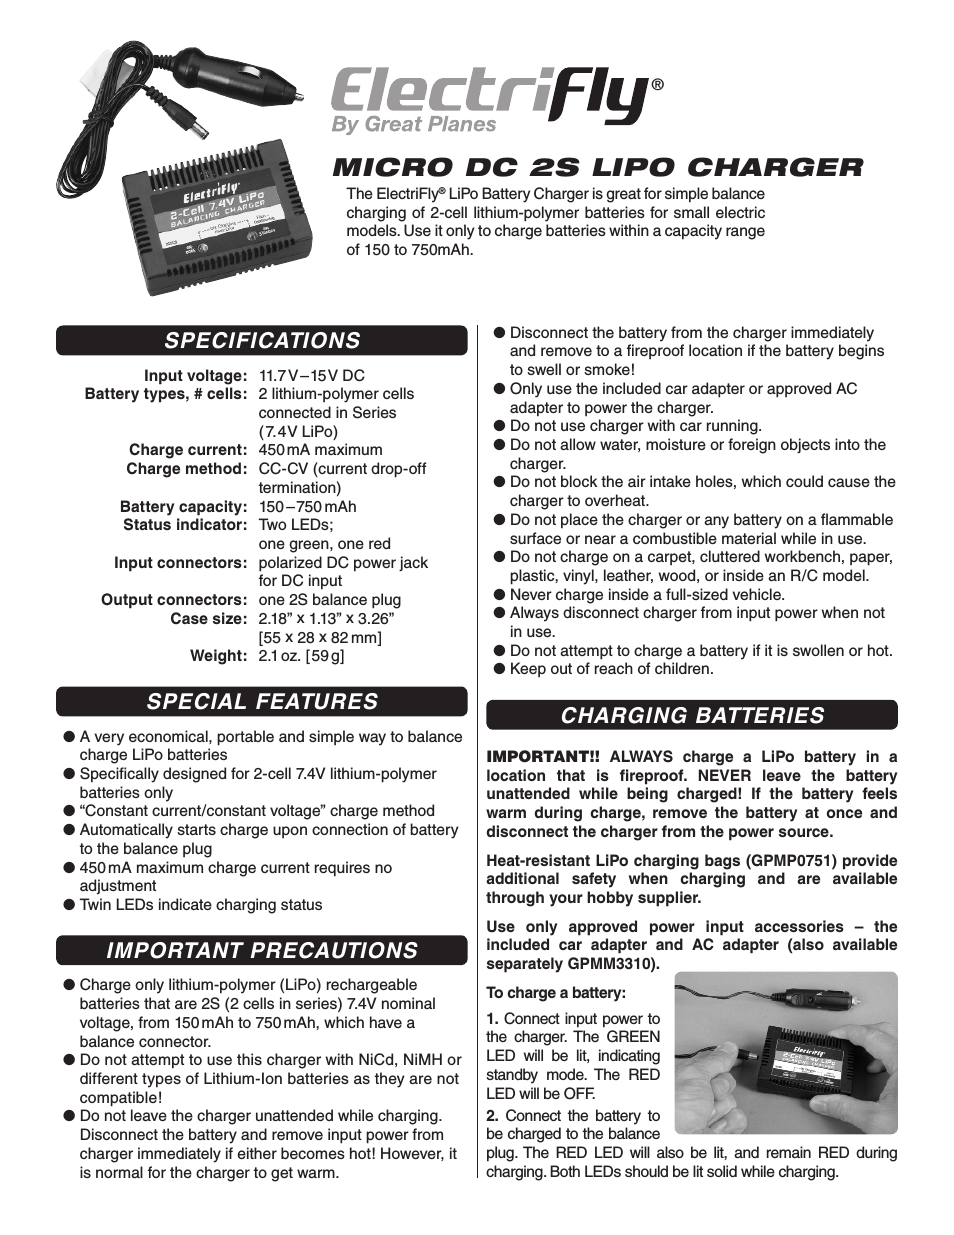 Micro DC 2S LiPo Charger w/Car Adapter - GPMM3322